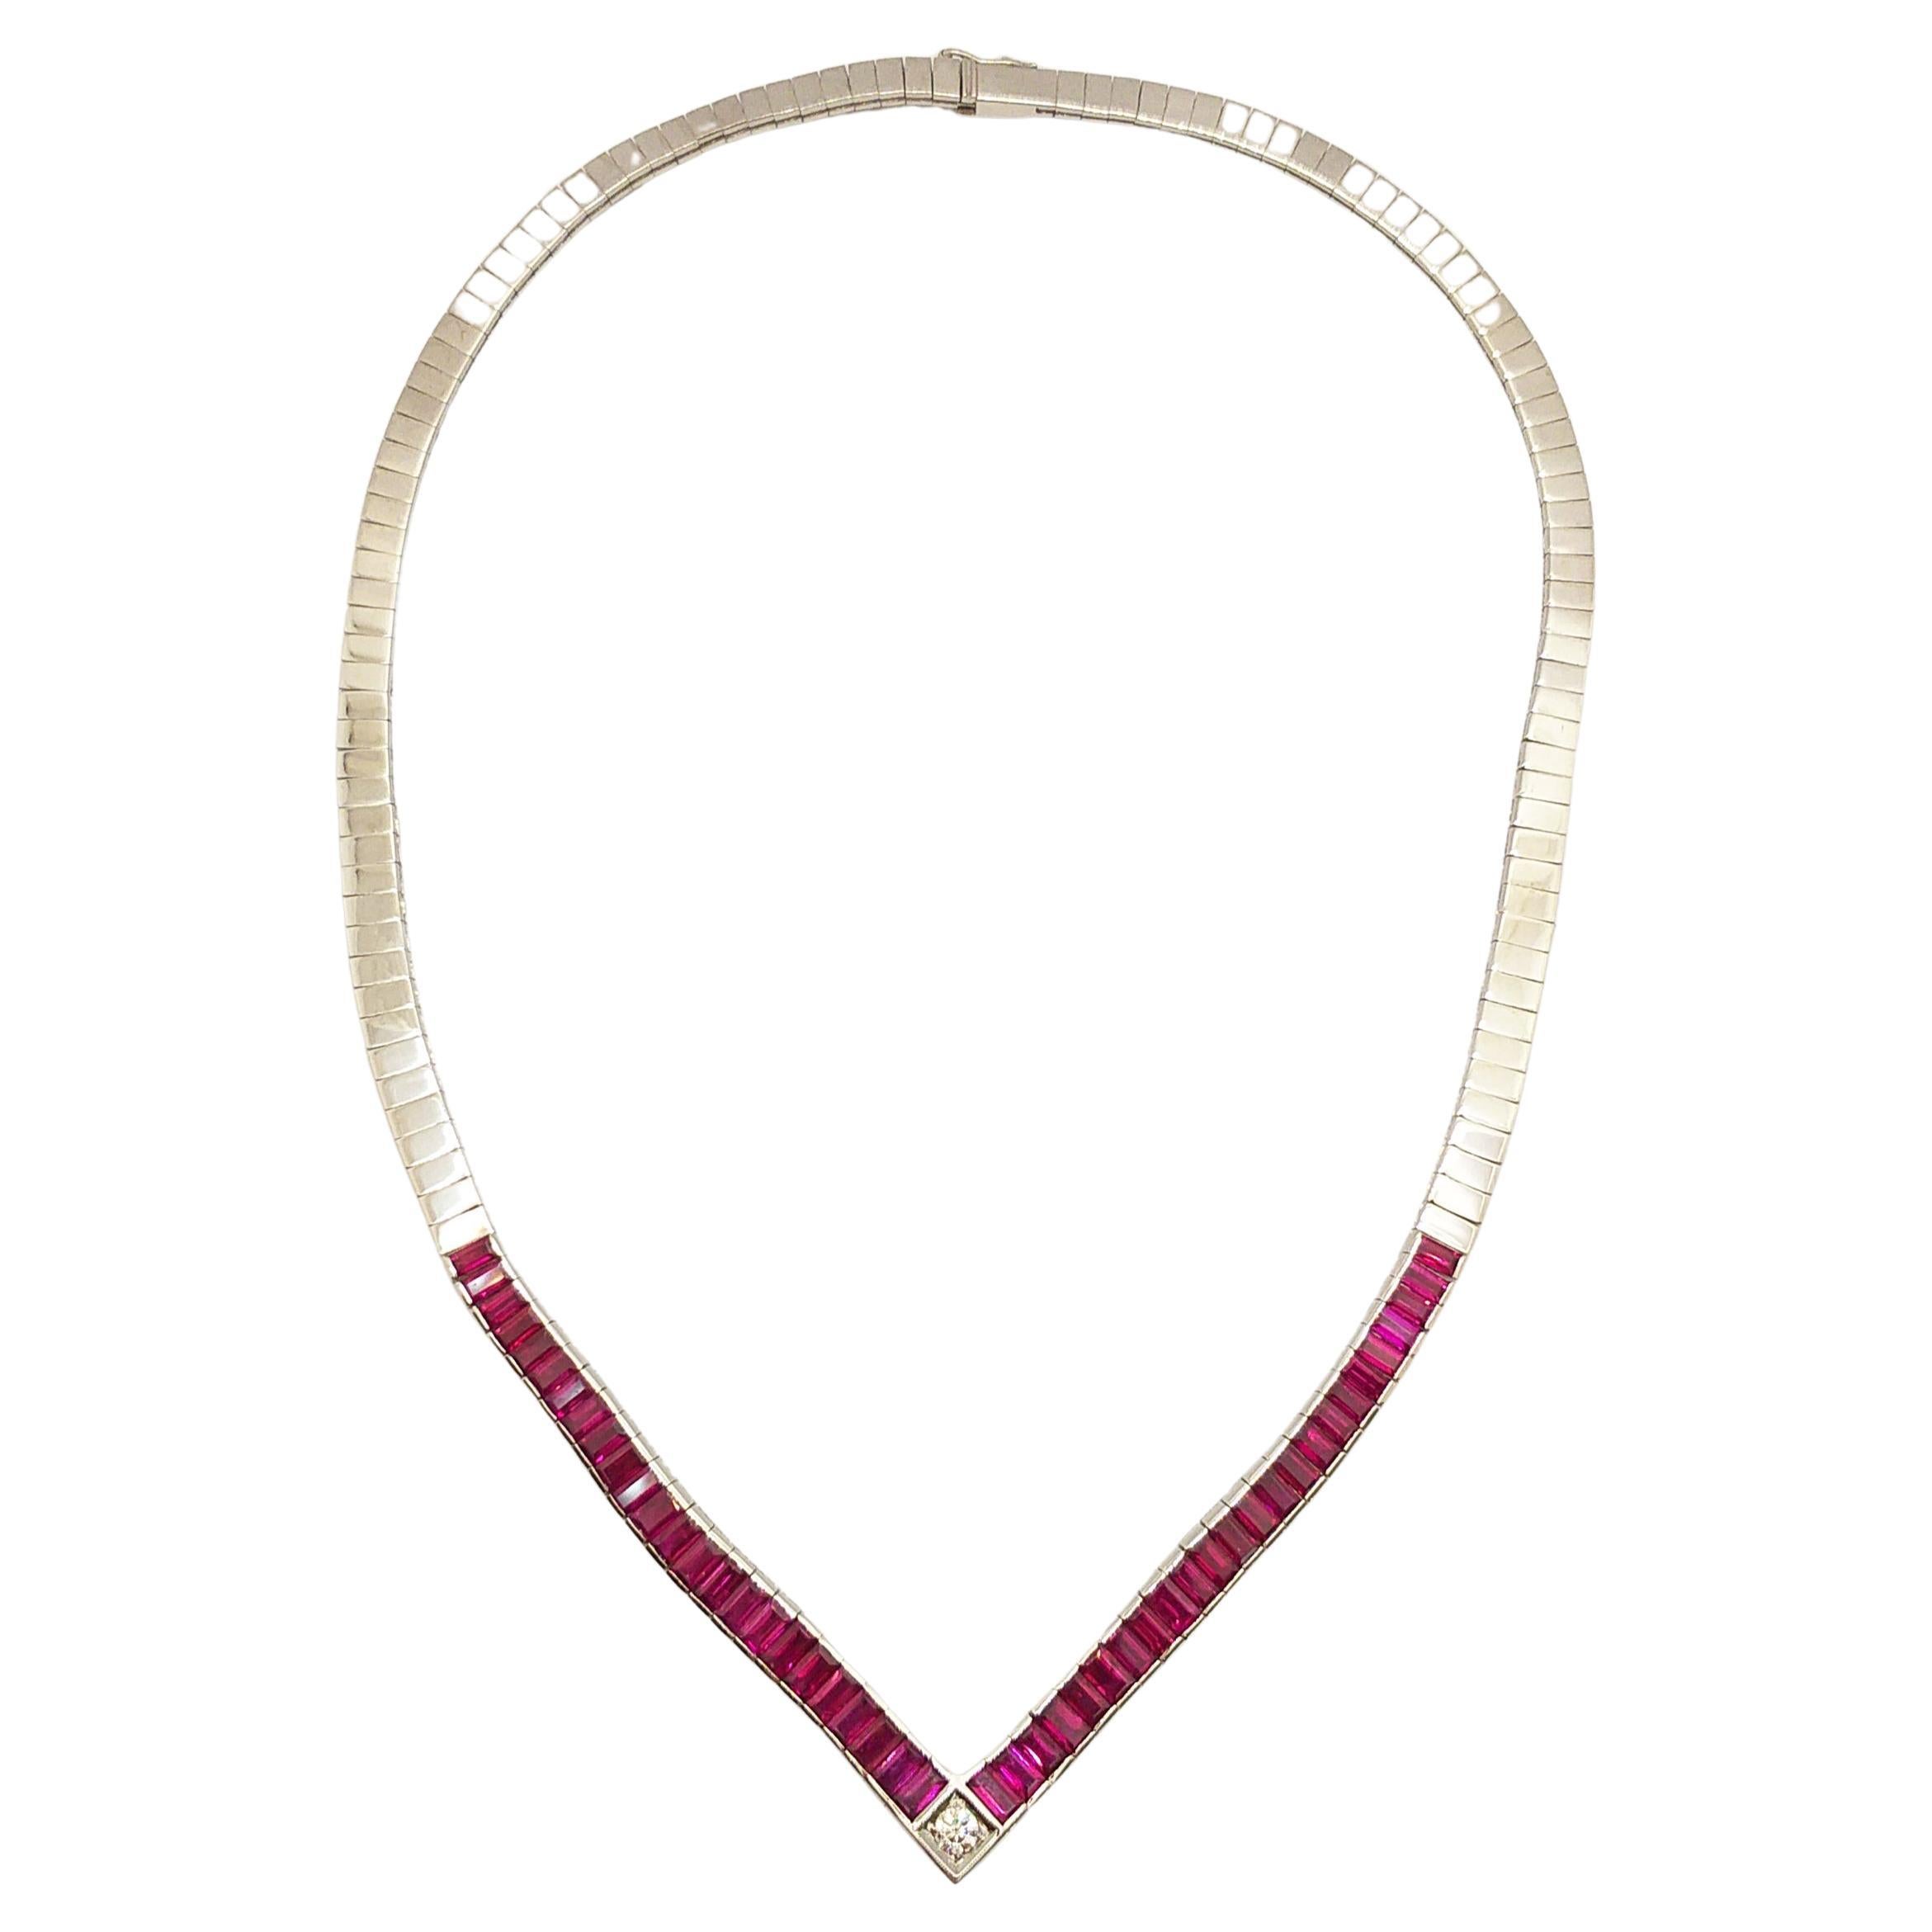 Ruby with Diamond Necklace Set in 18 Karat White Gold Settings